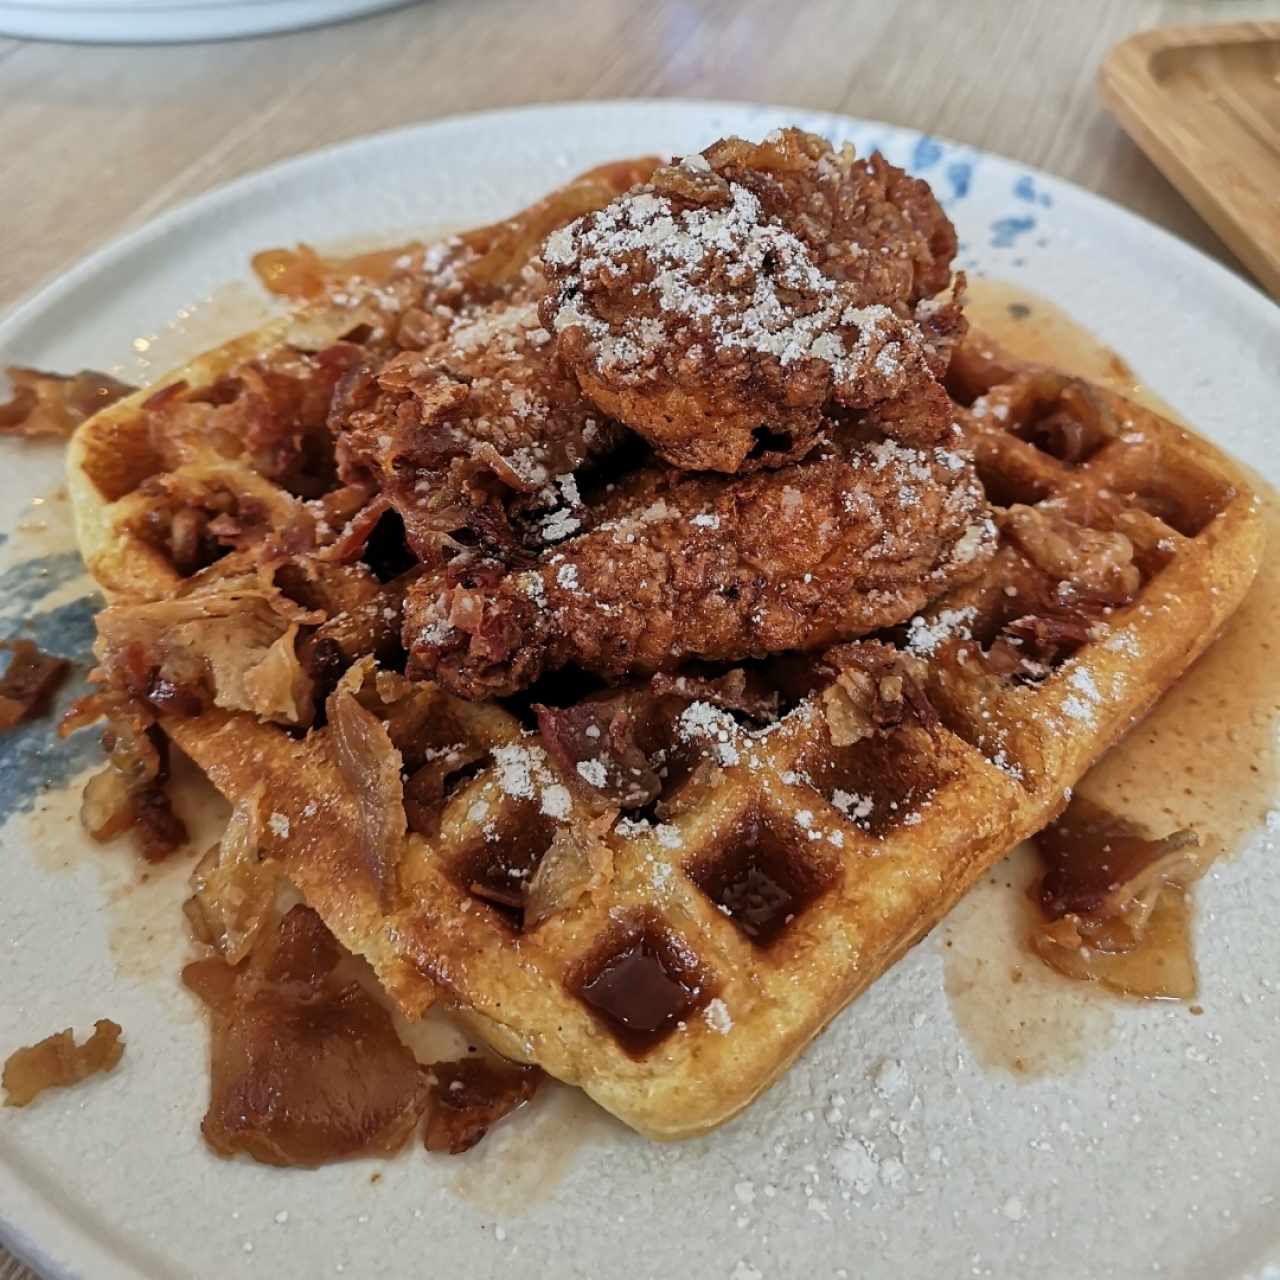 Chicken and waffles 